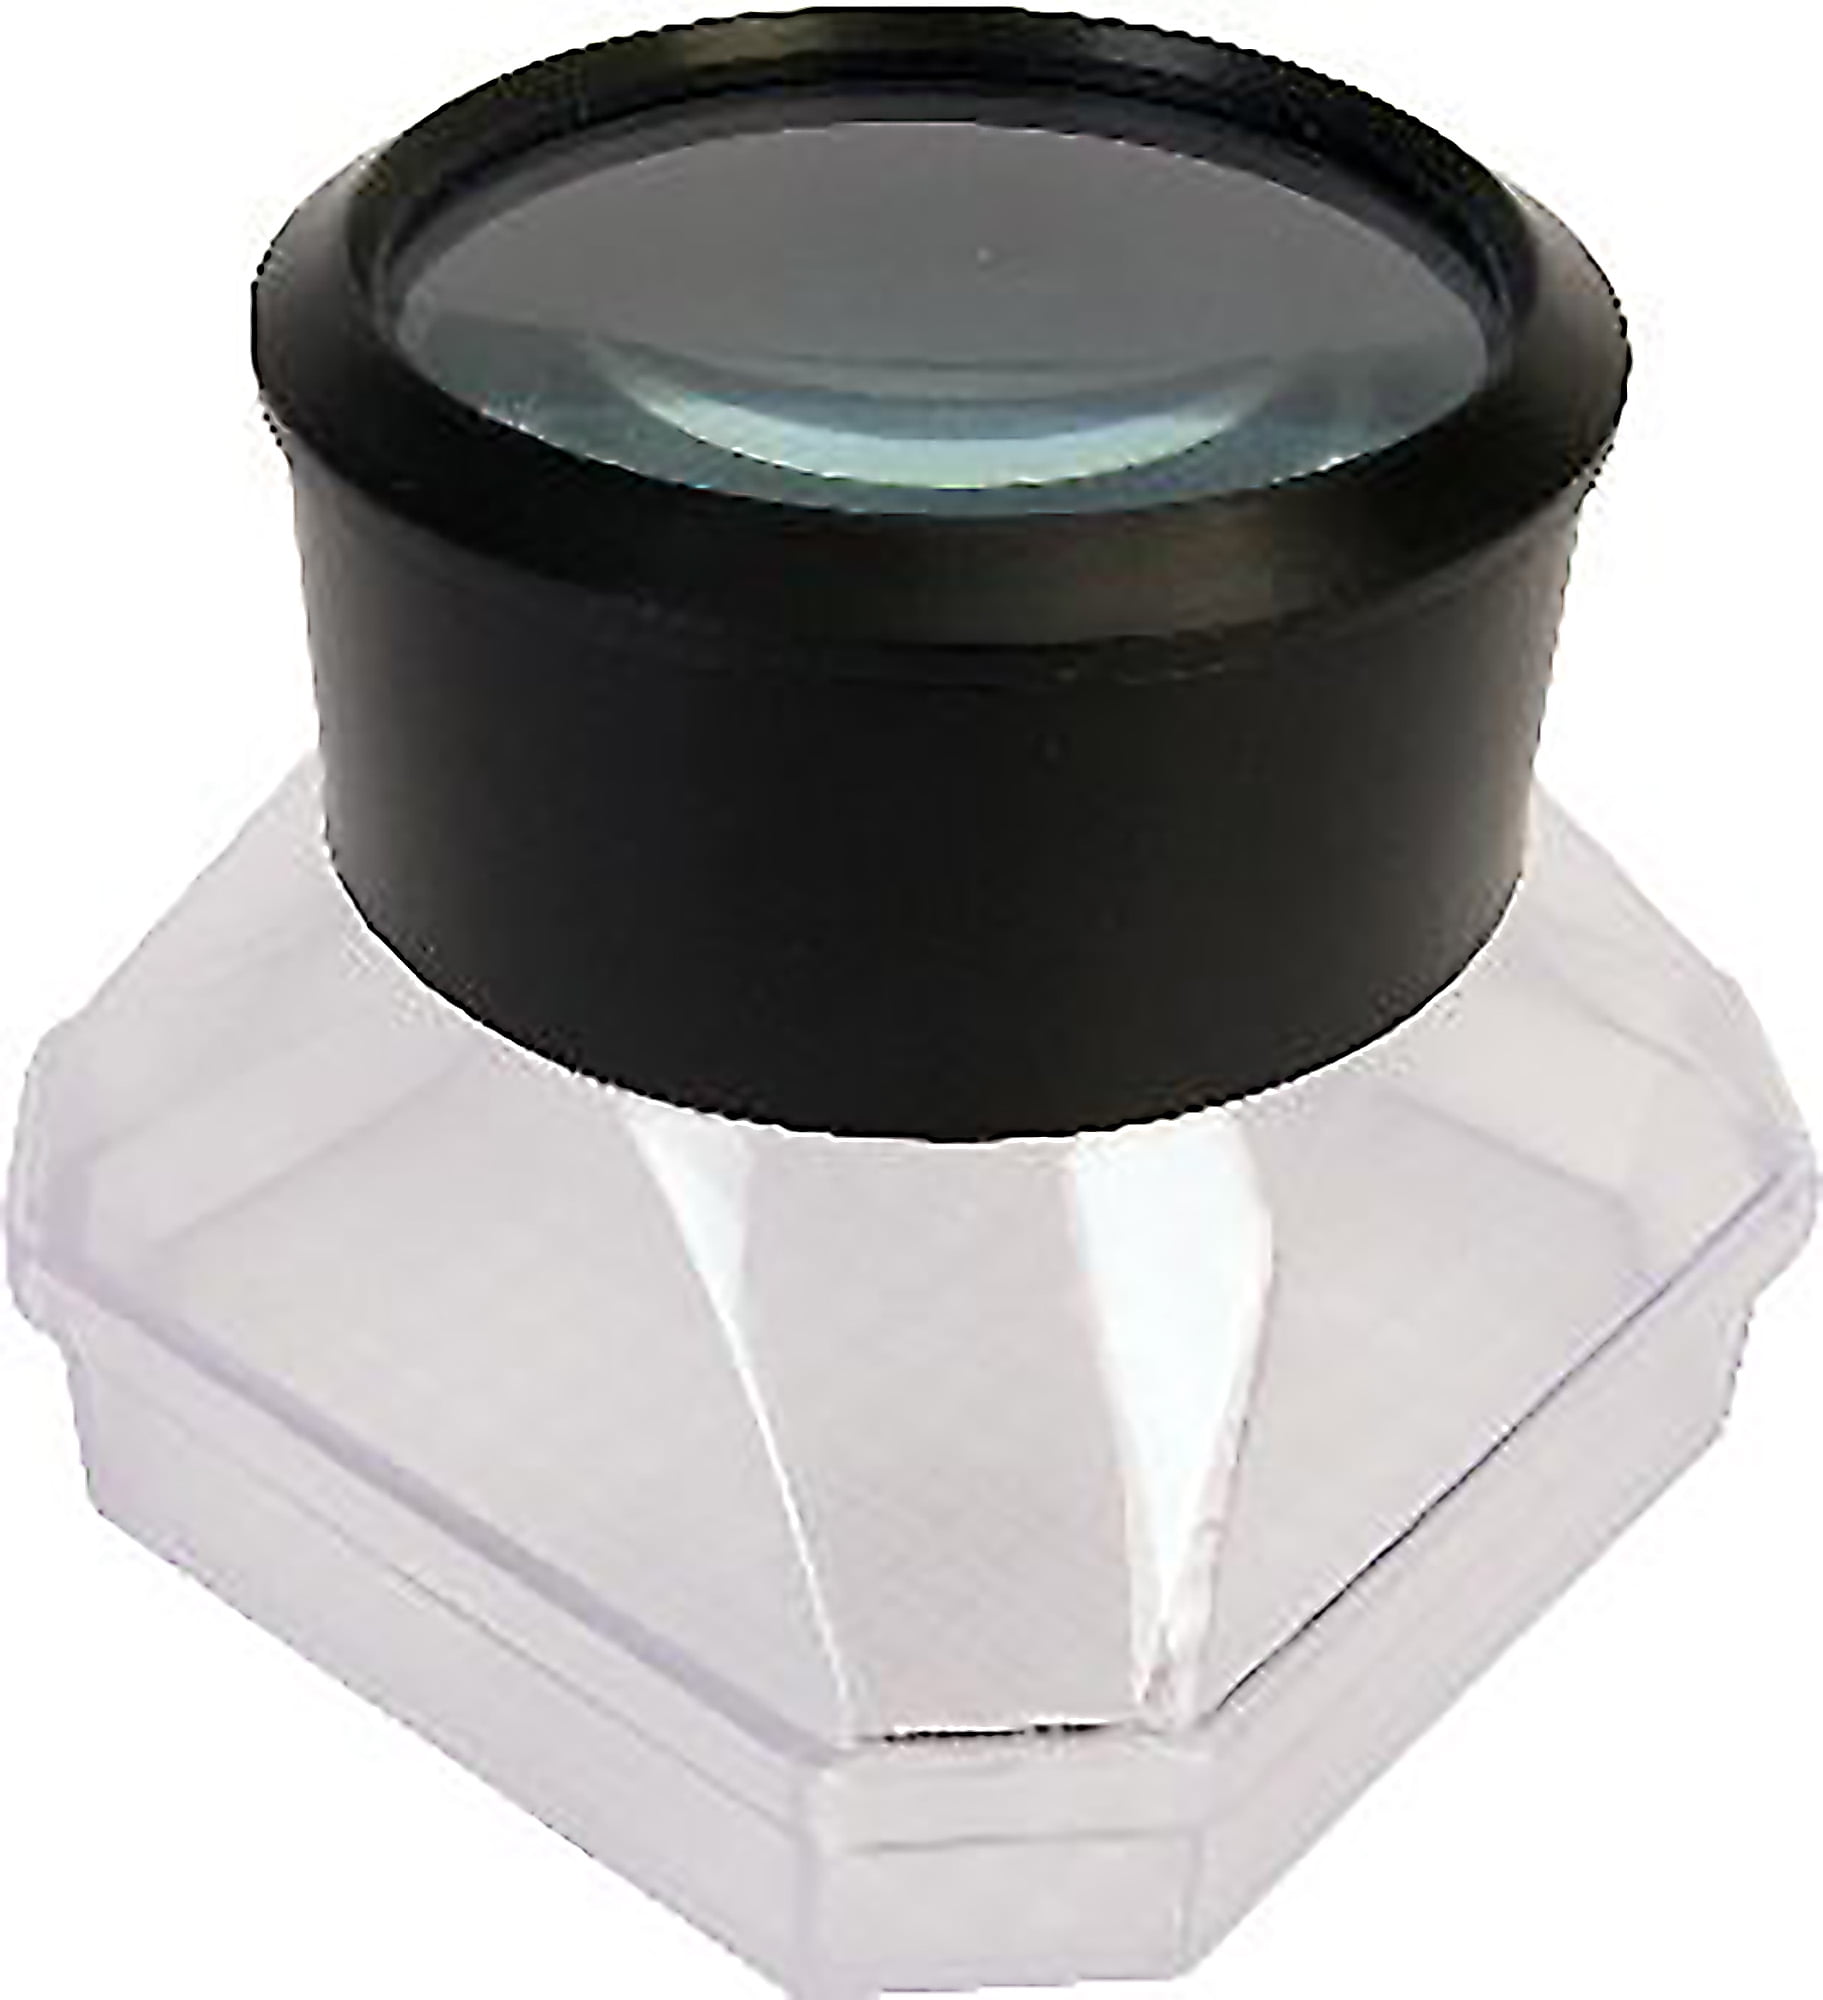 Bug Viewer X 10 Pooter & FREE STUDY CARDS Jumbo Magnifying Glass 